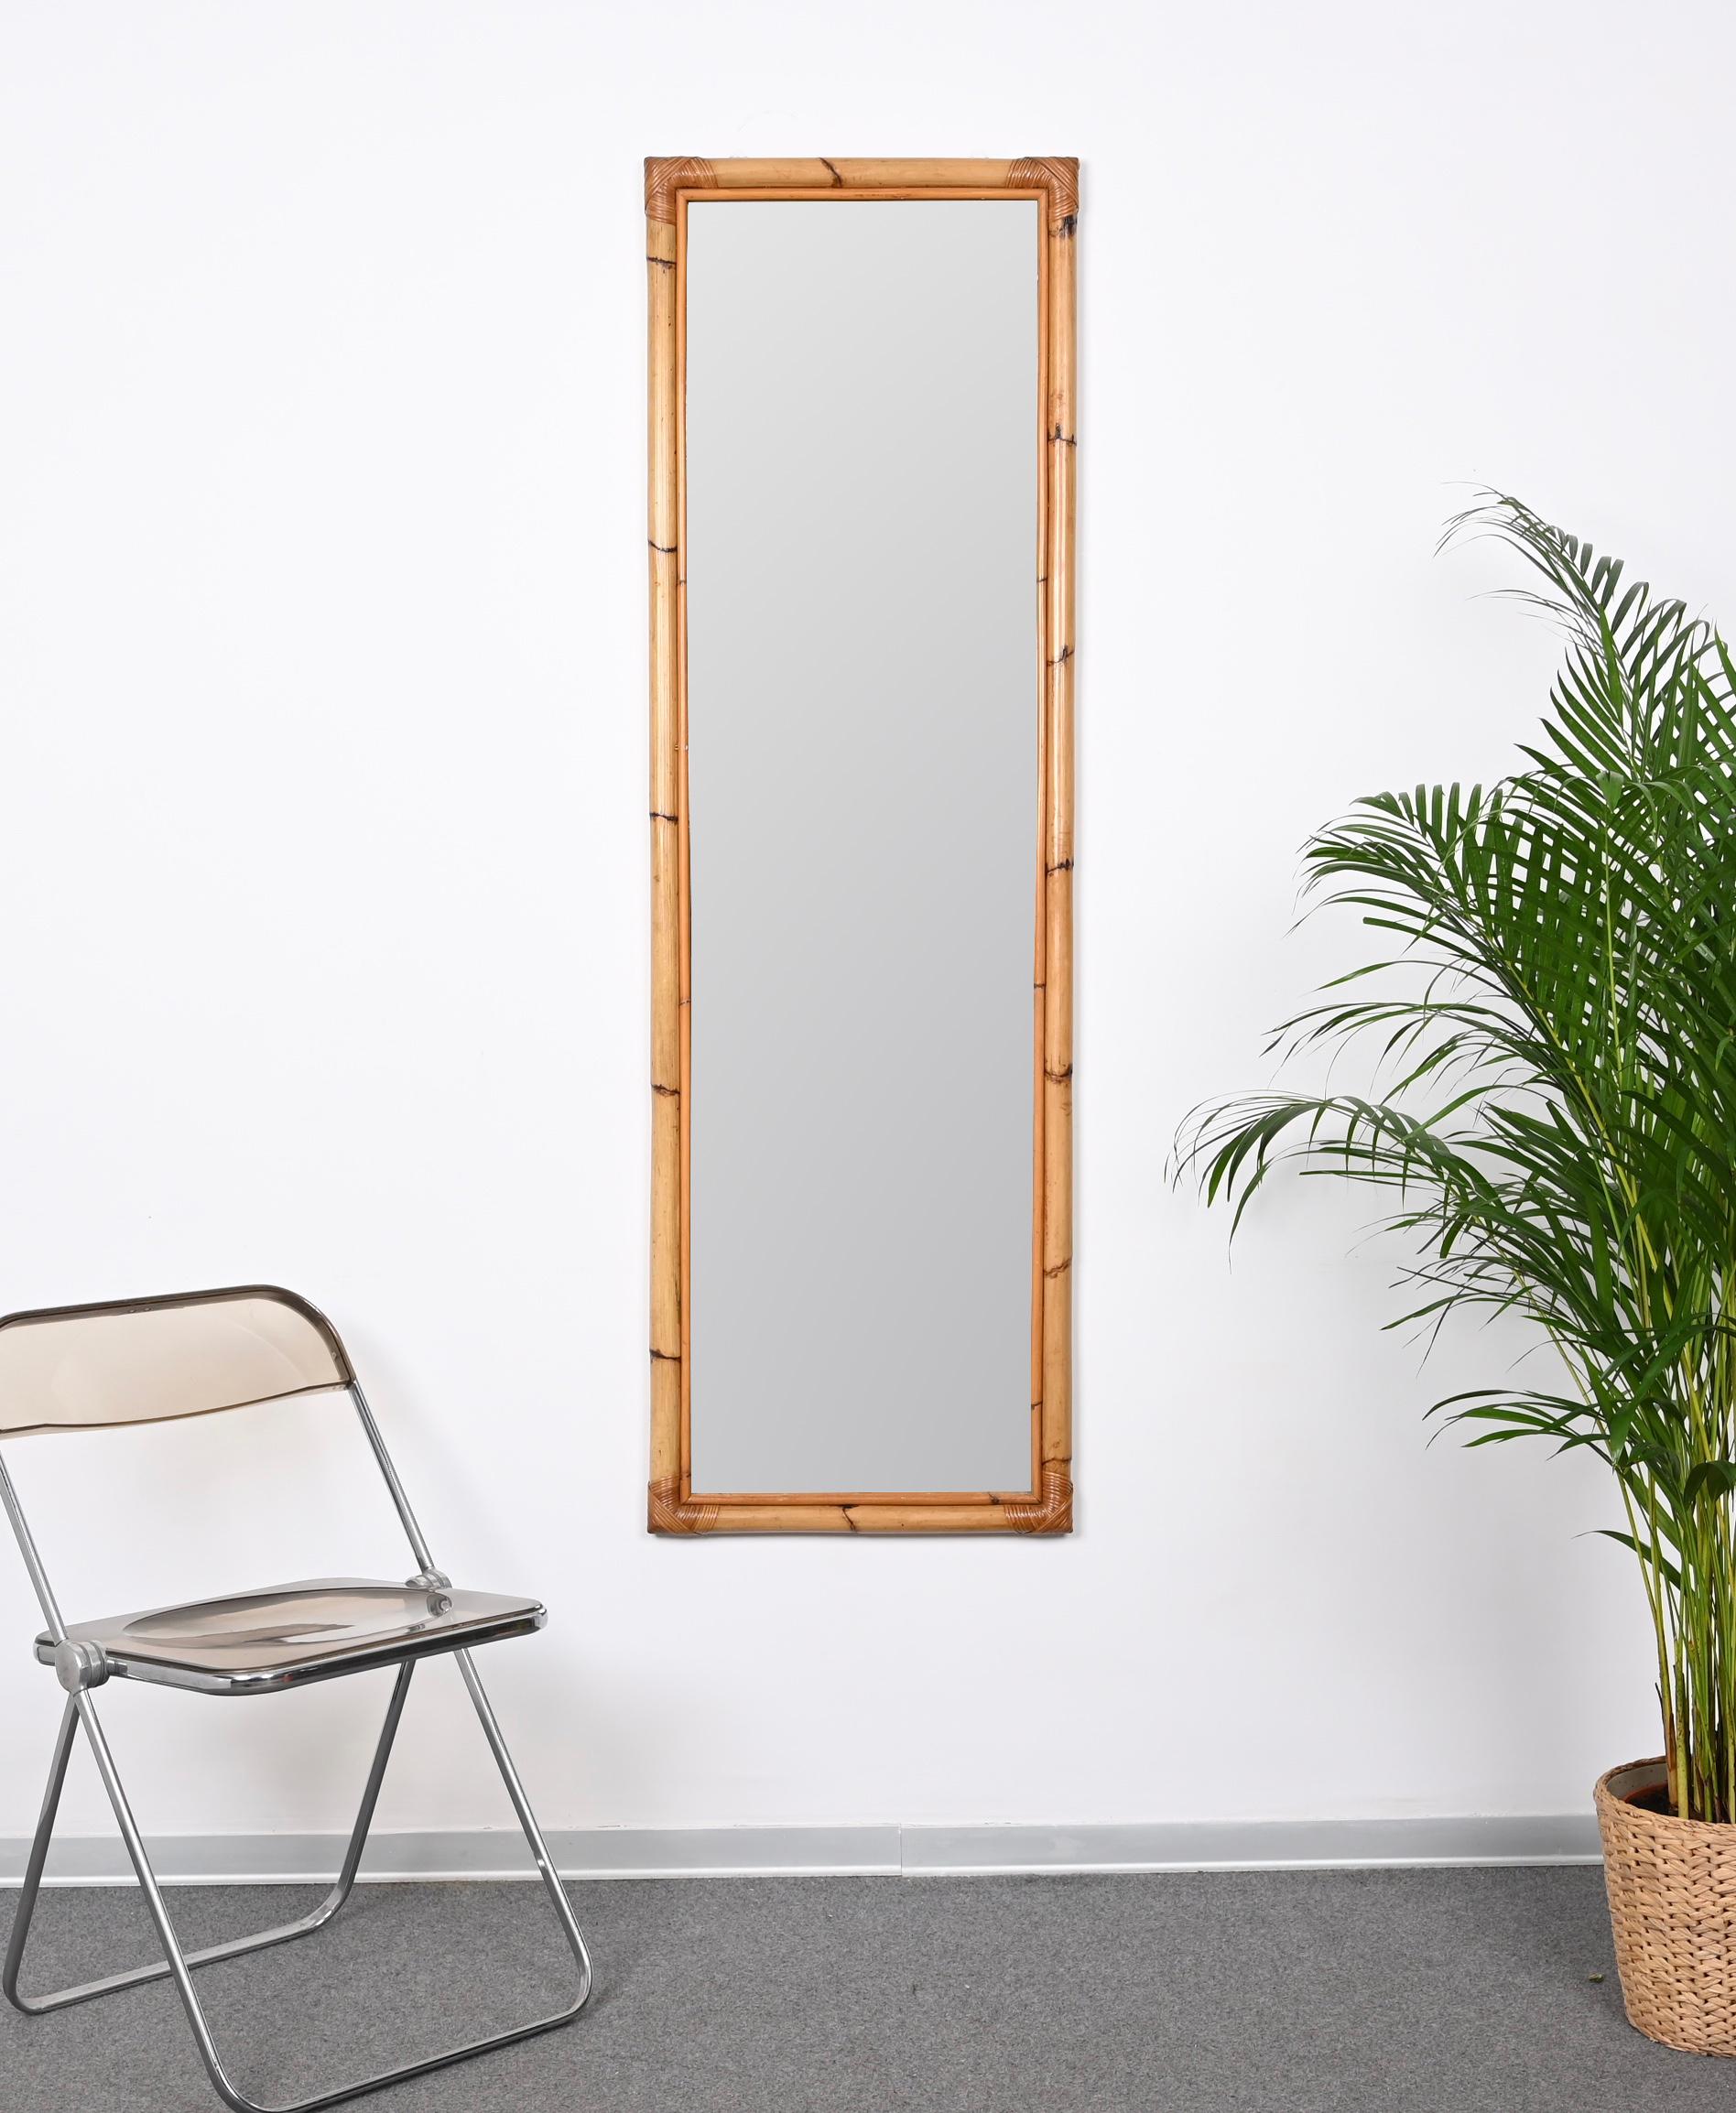 Mid-Century Modern Midcentury Rectangular Mirror with Bamboo and Rattan Frame, Italy, 1970s For Sale